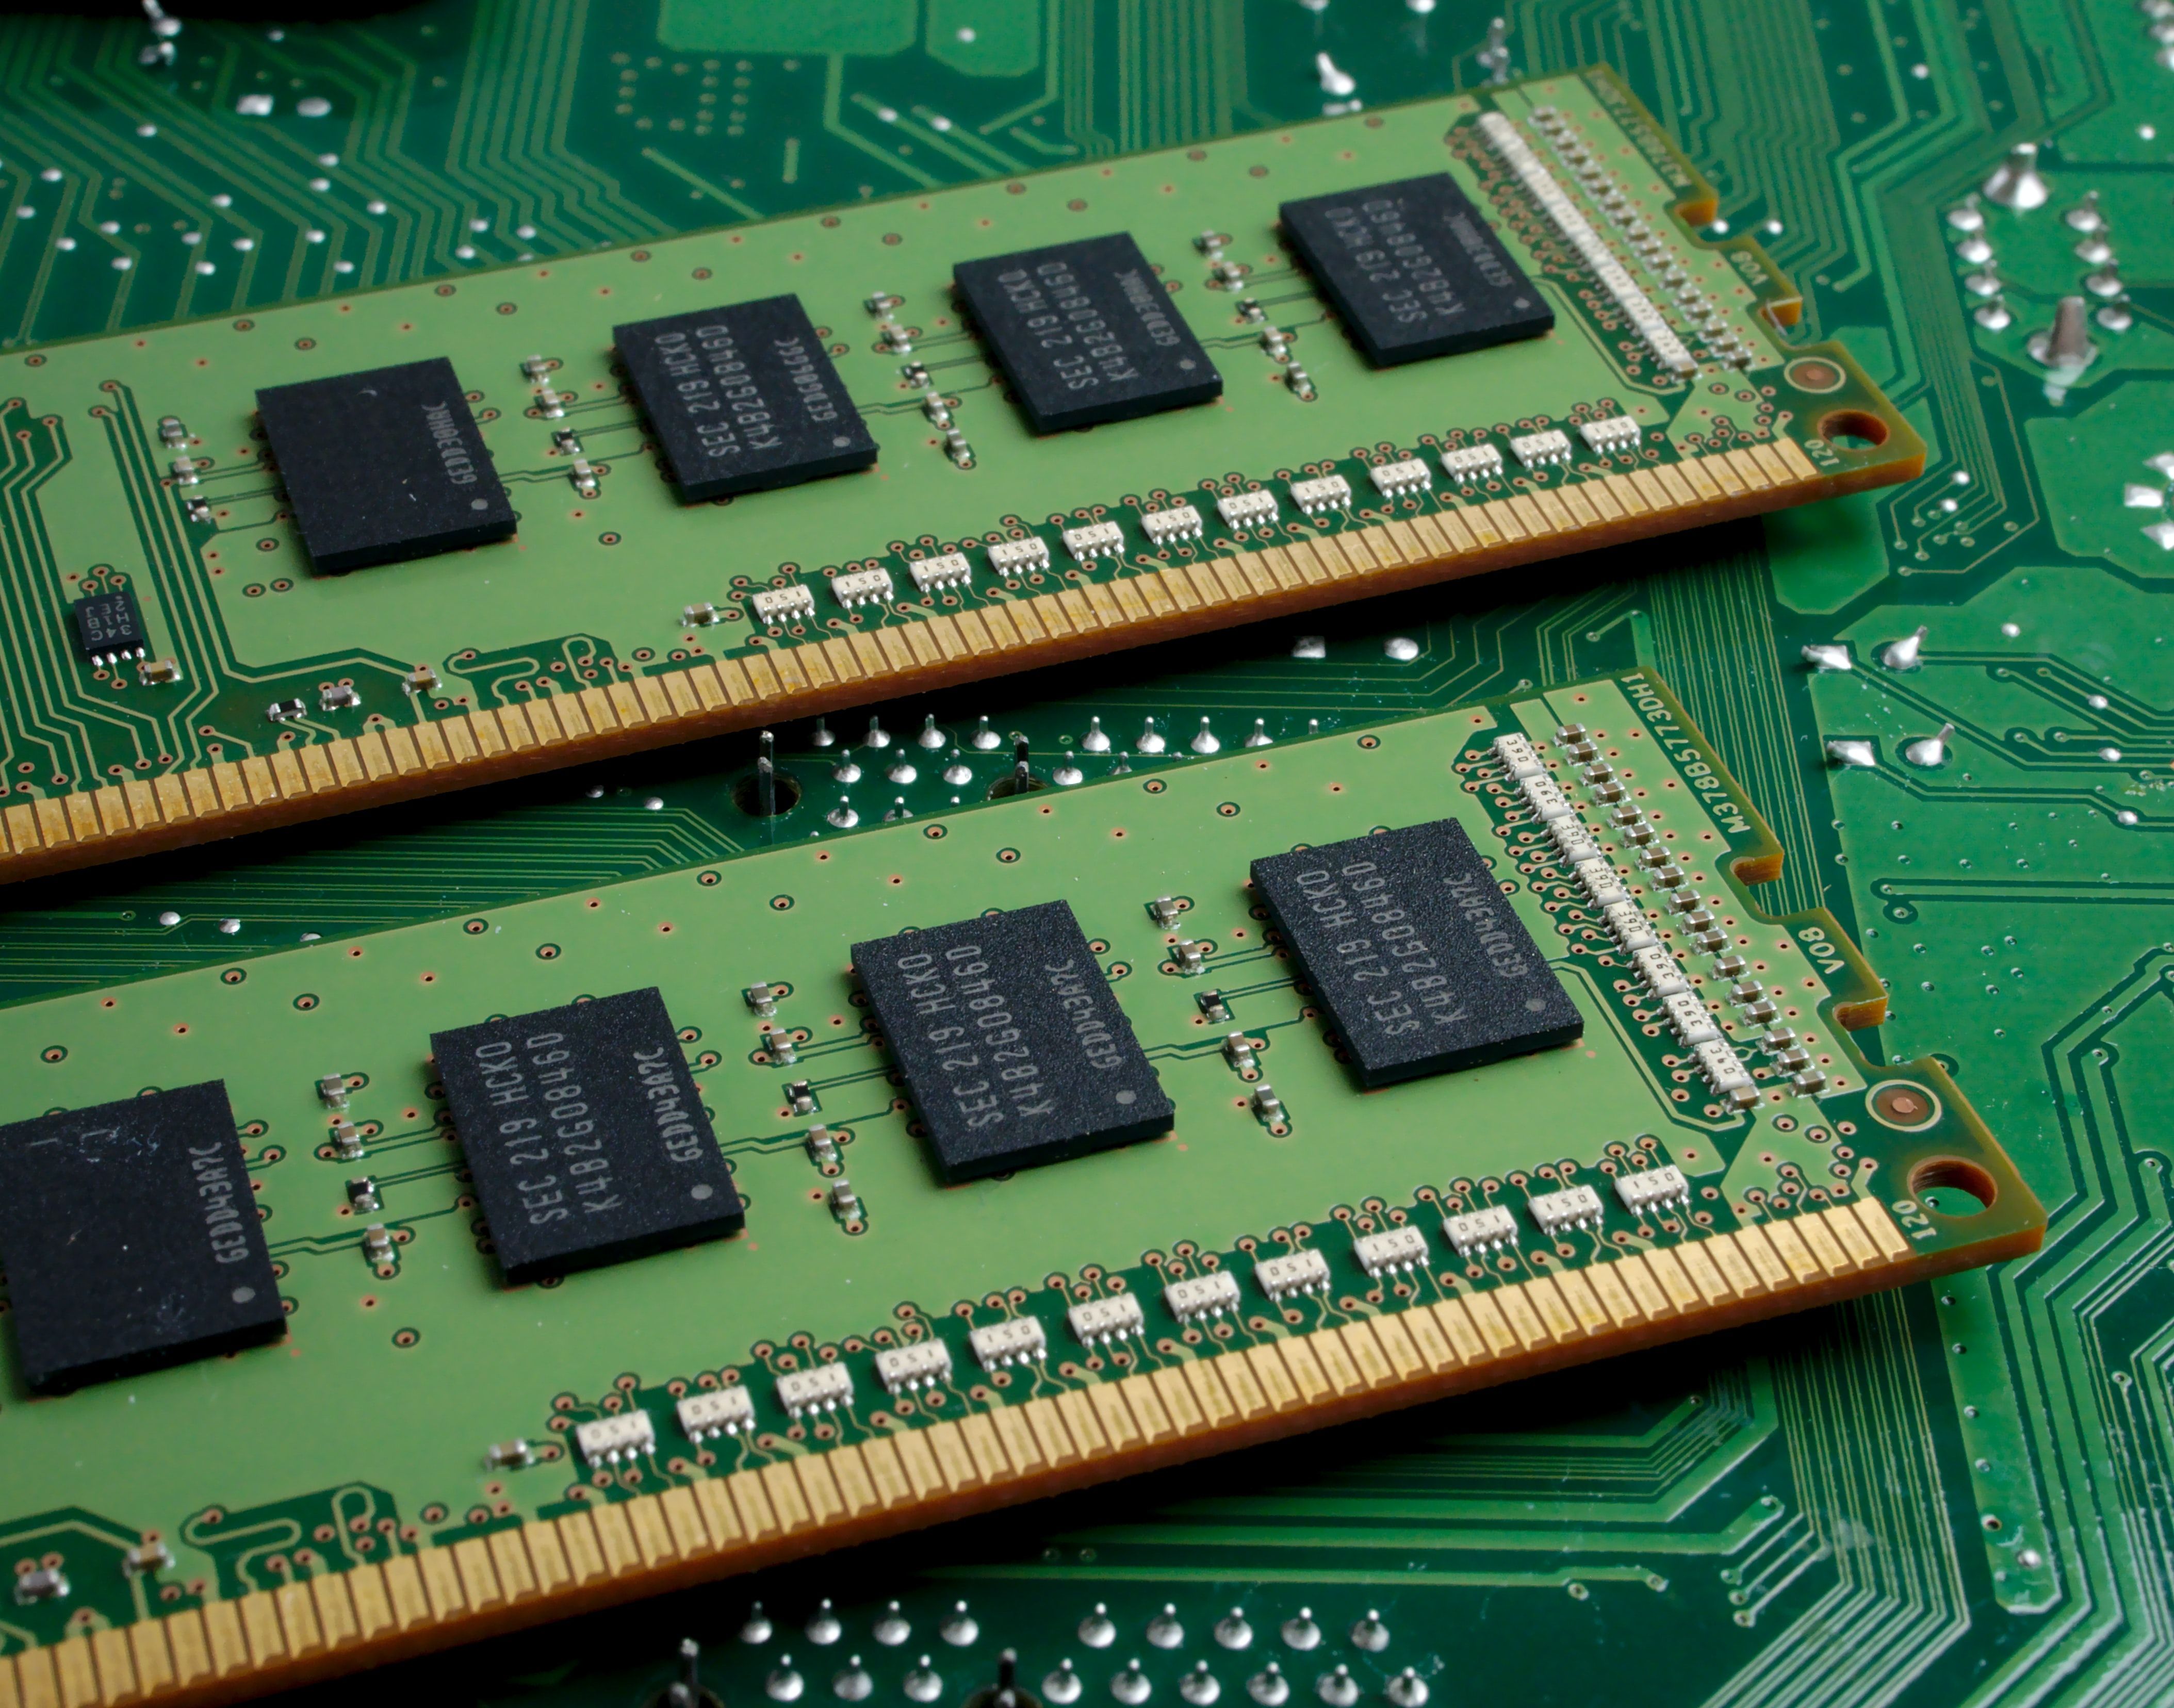 circuitboards and RAM